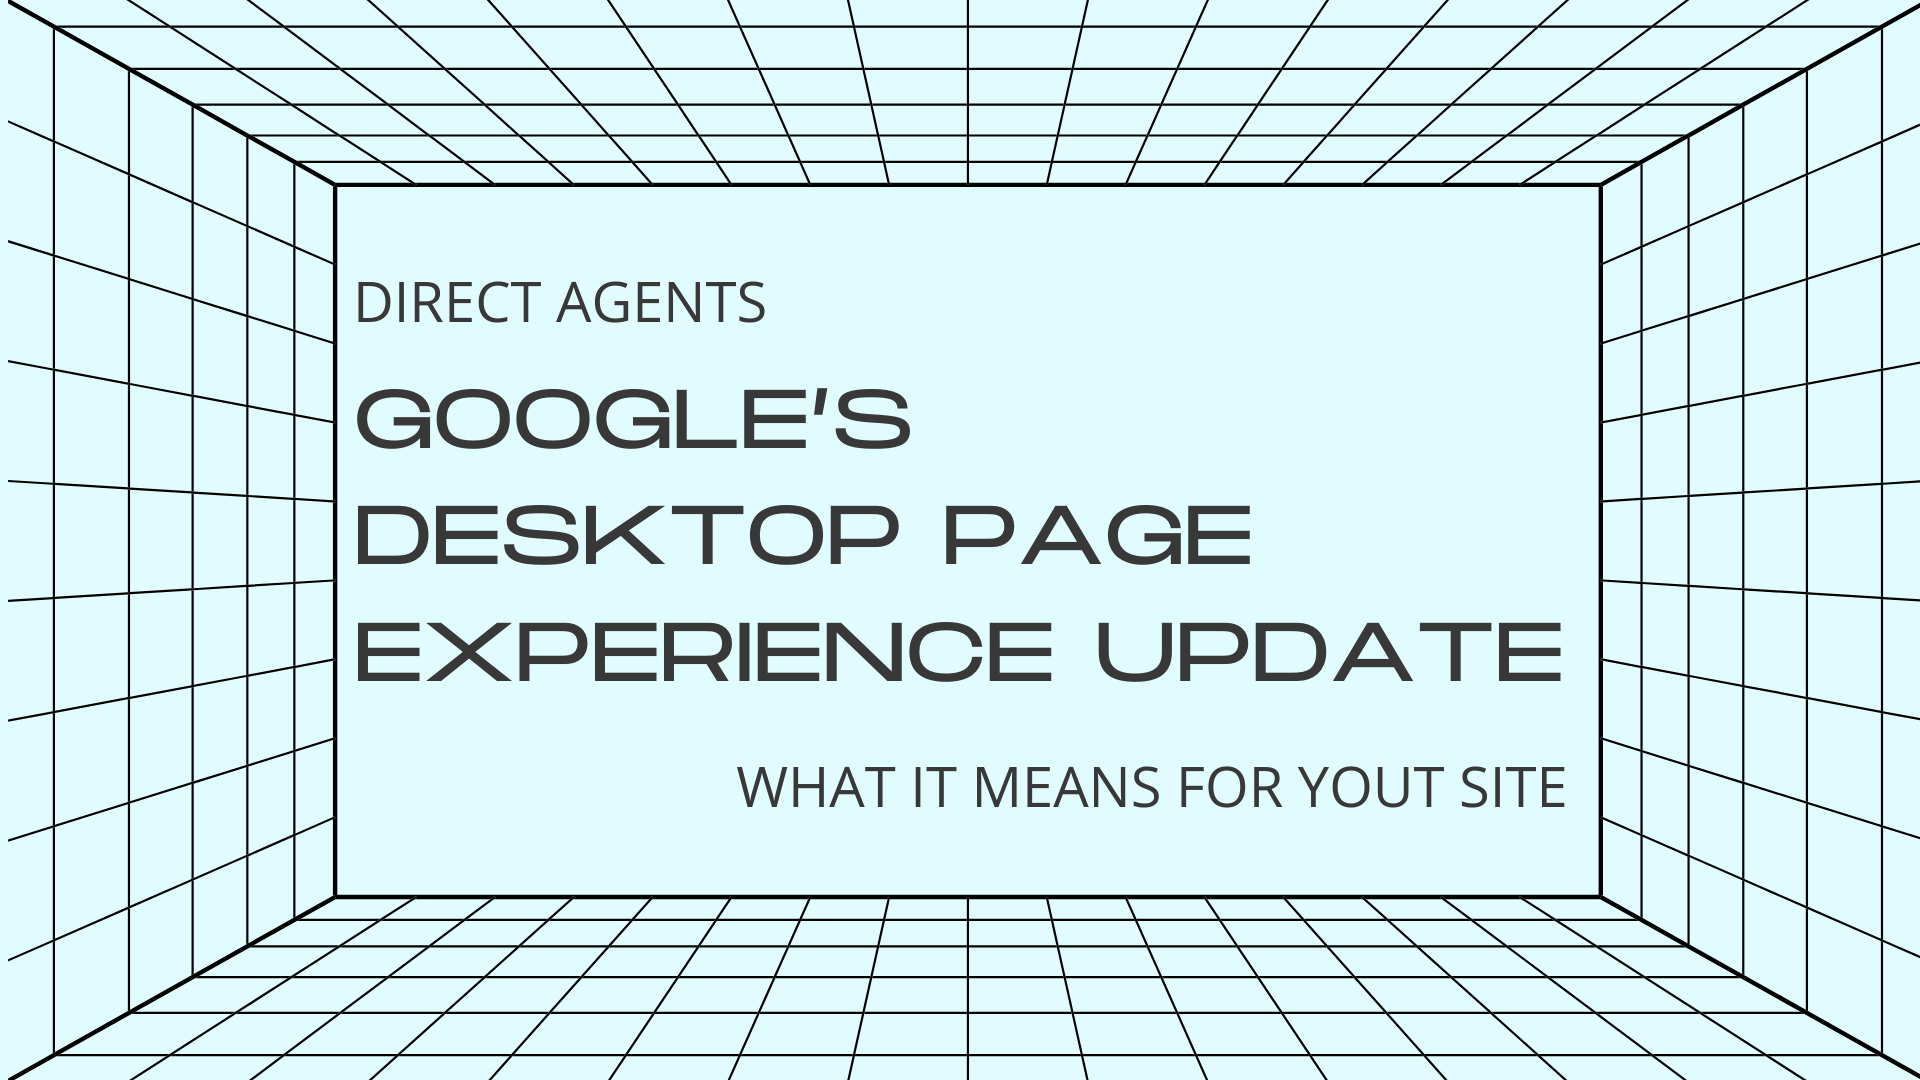 What Google’s Desktop Page Experience Update Means for Your Site